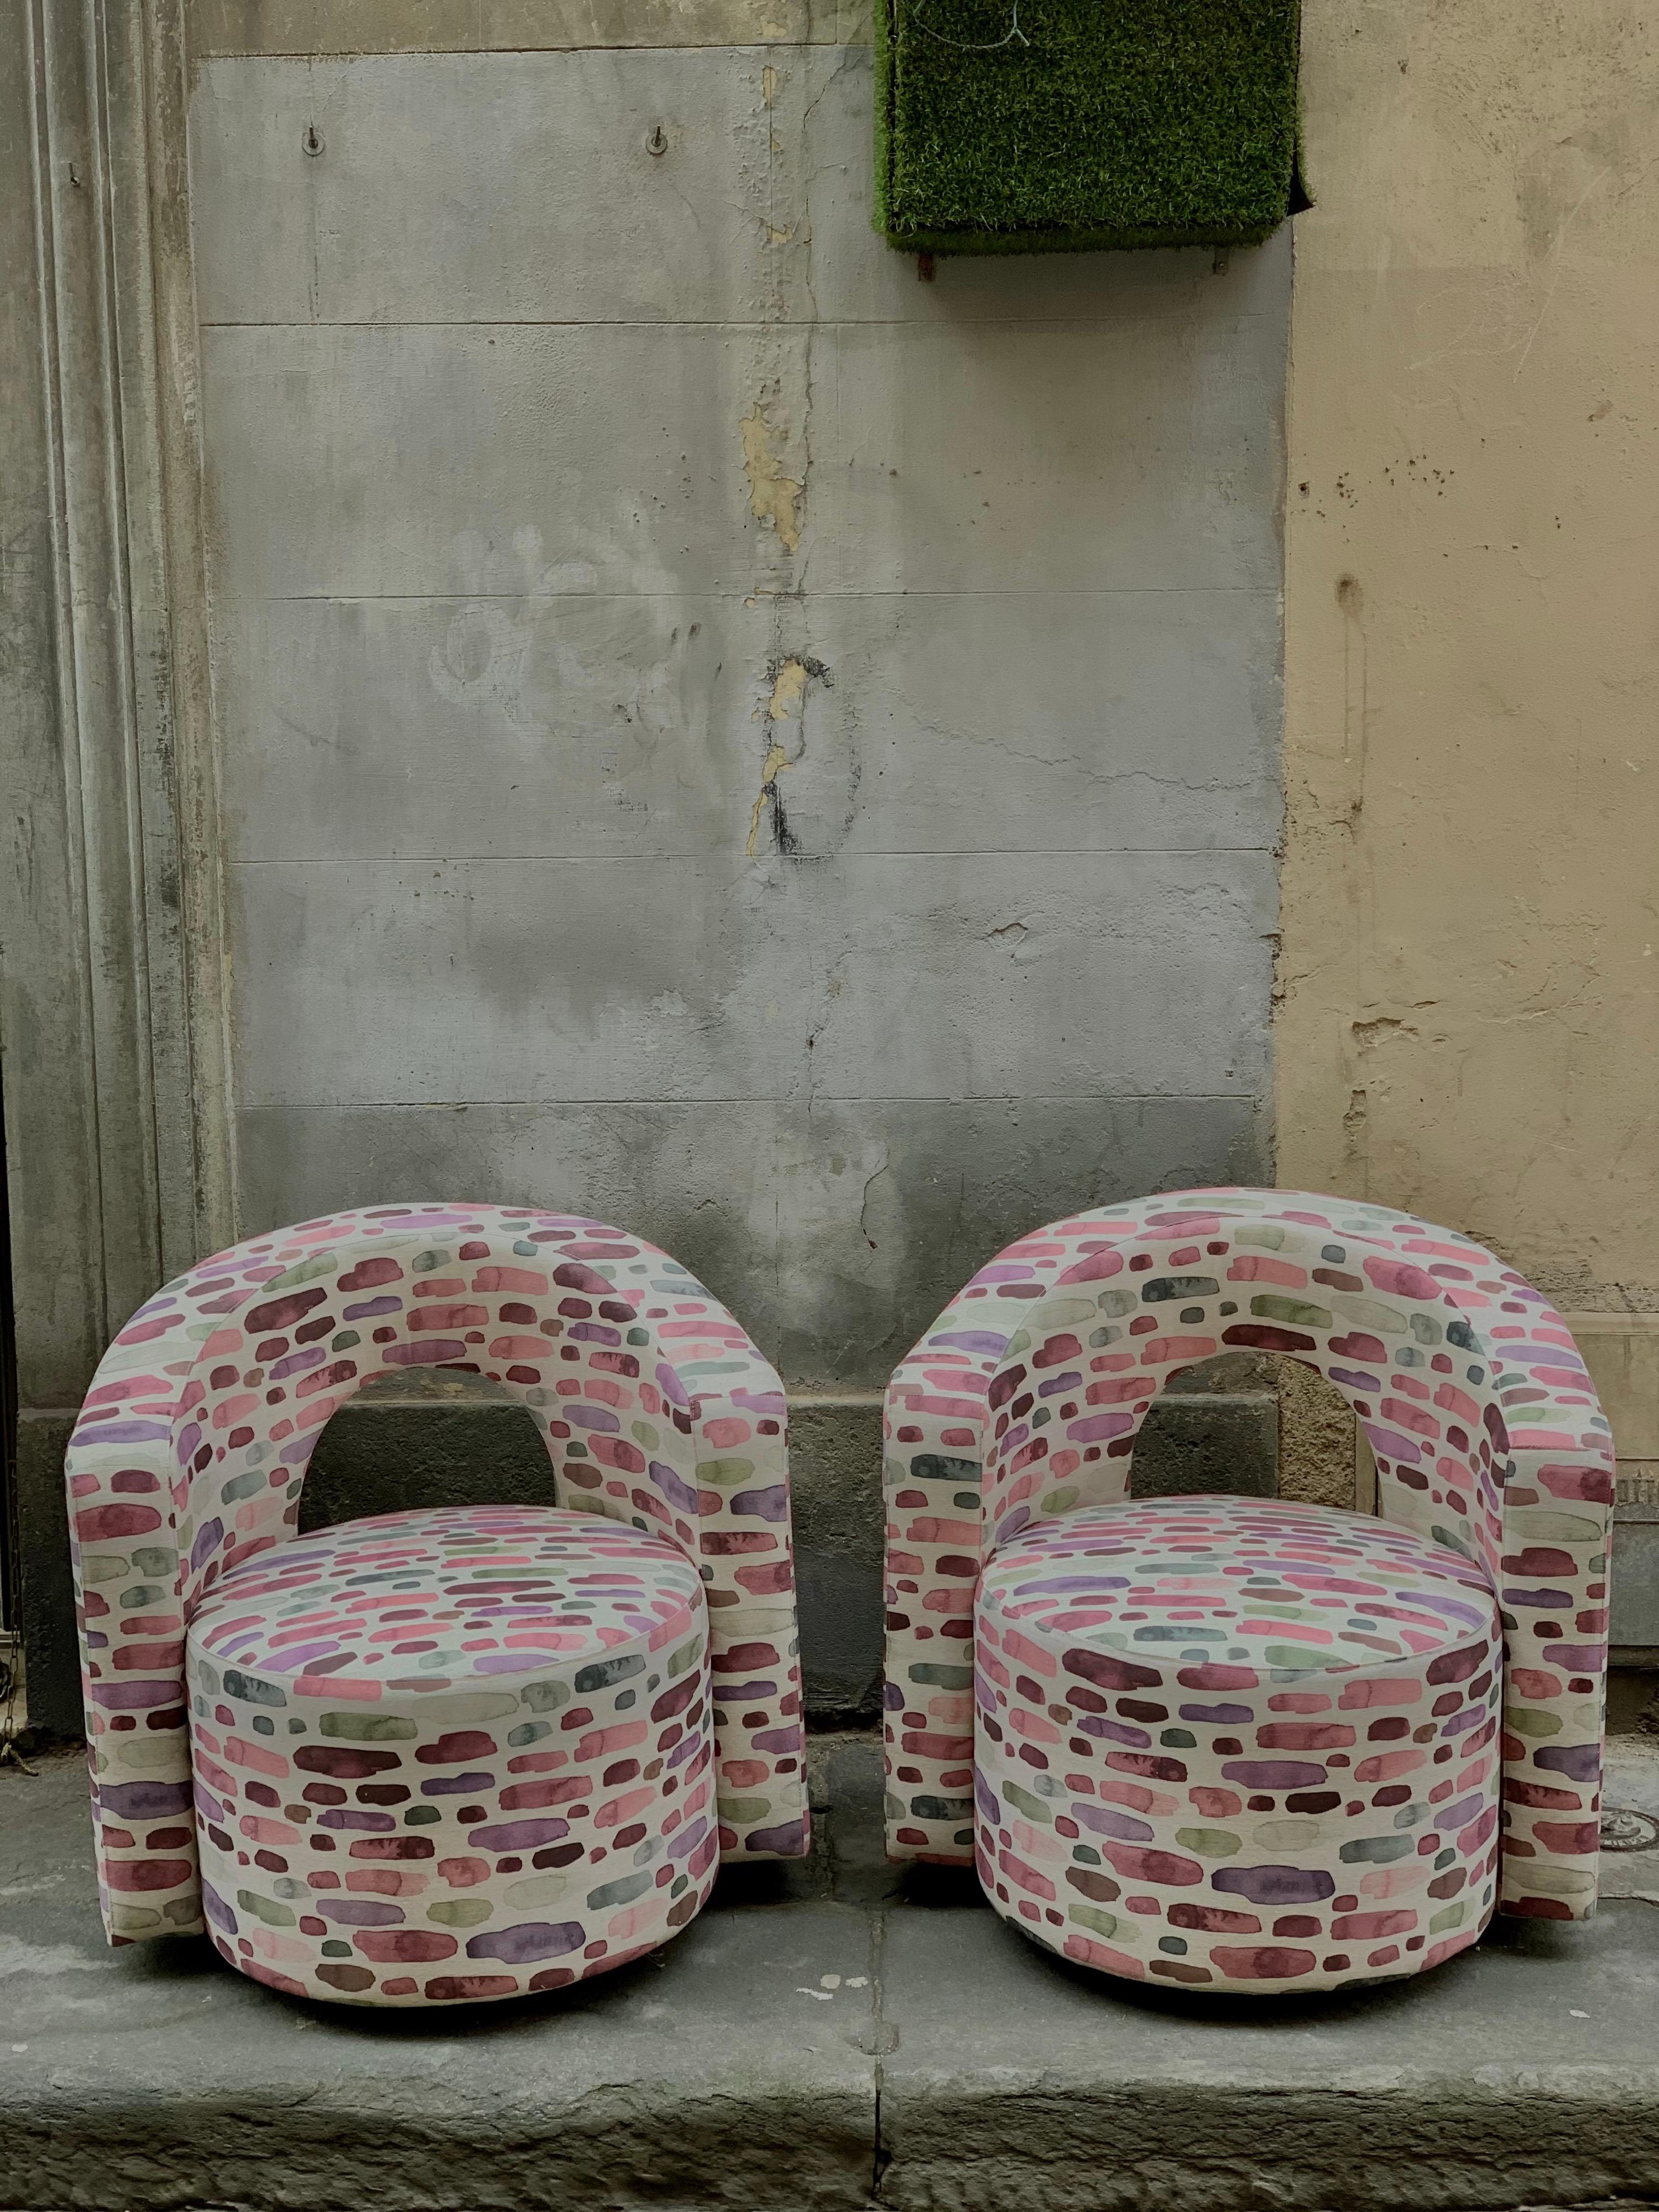 Italian Pair of Vintage Armchairs Newly Upholstered with Fantasy Cotton Fabric, 1970s For Sale